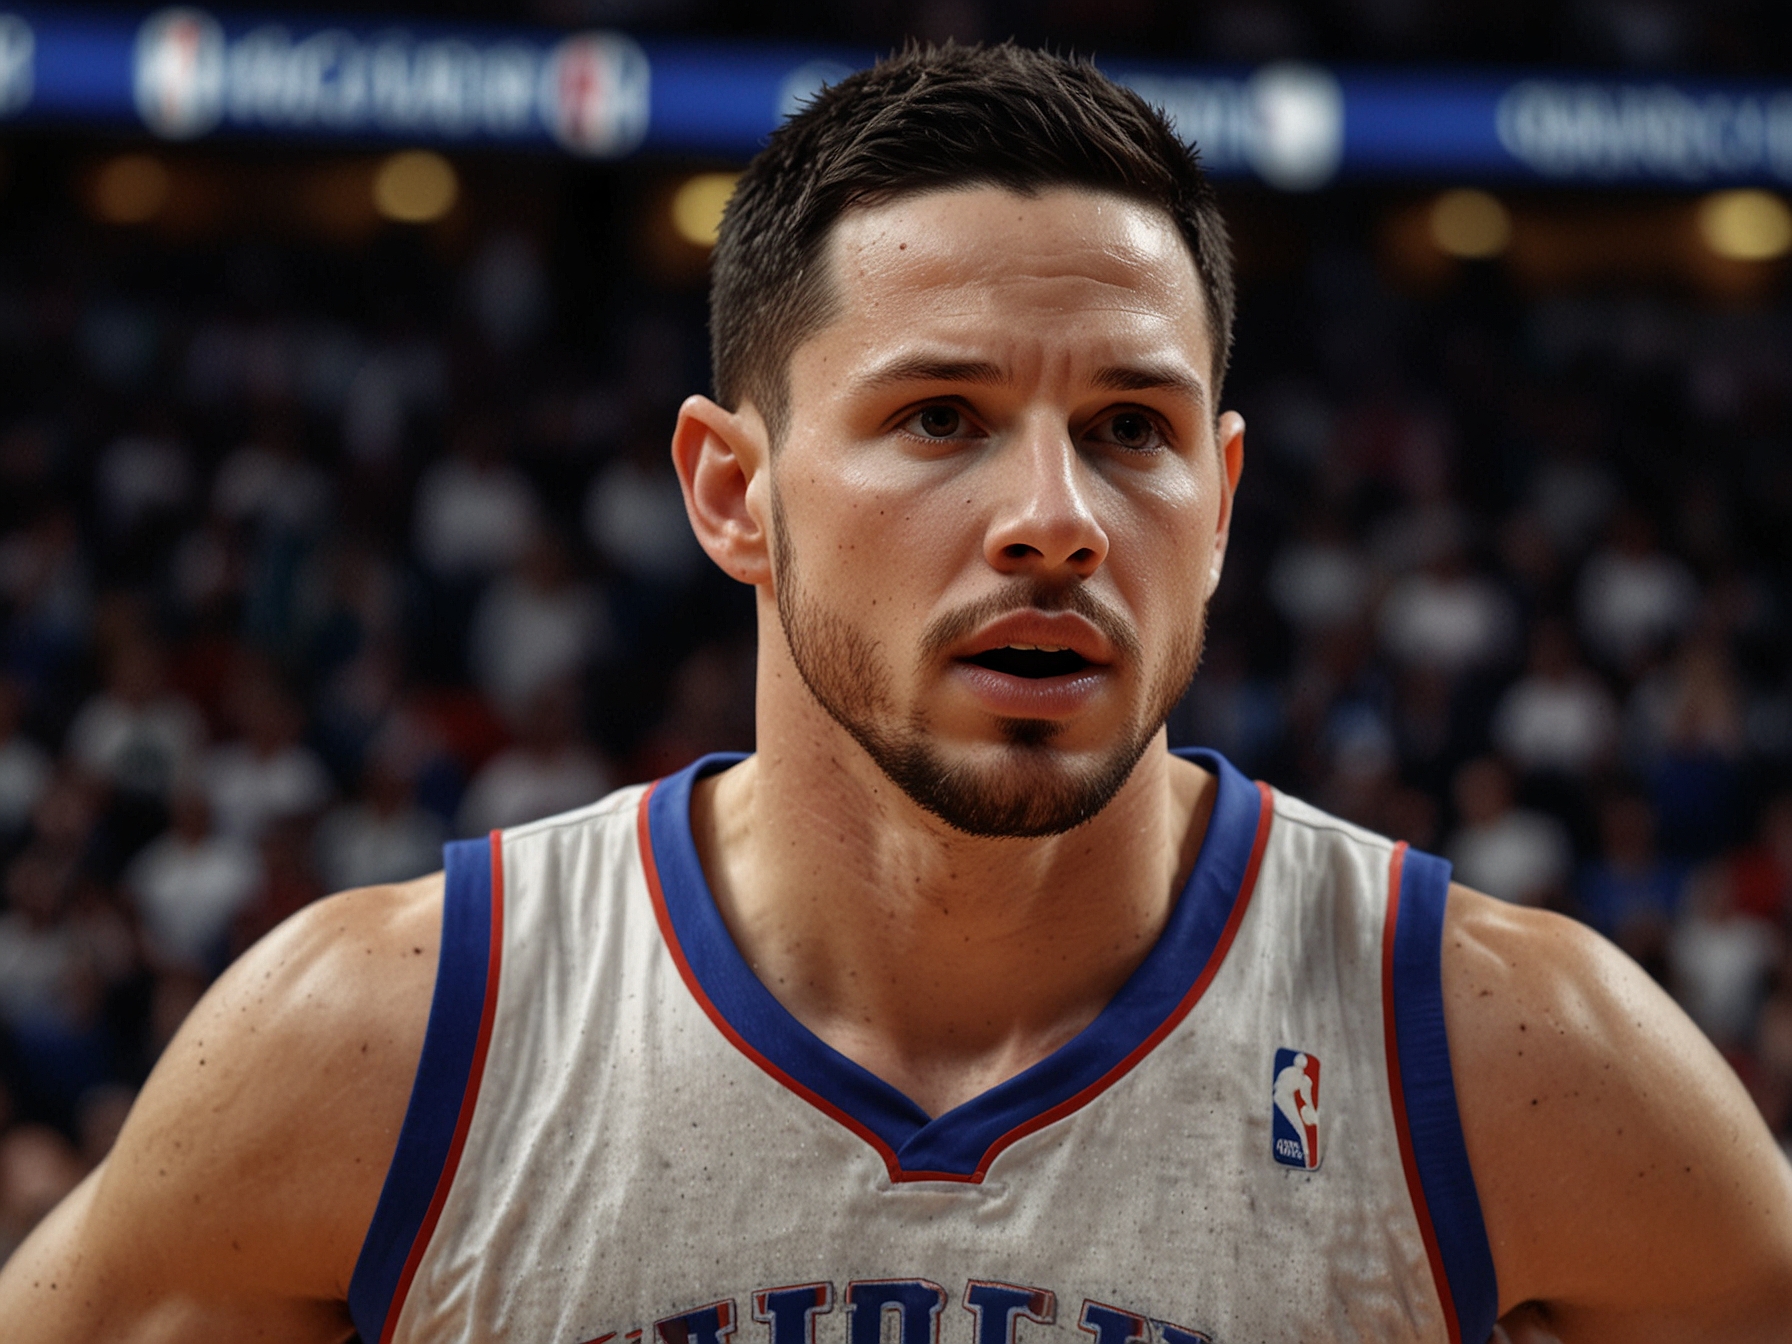 JJ Redick on the basketball court, demonstrating his leadership and strategic acumen, key traits that support his potential as a future NBA coach.